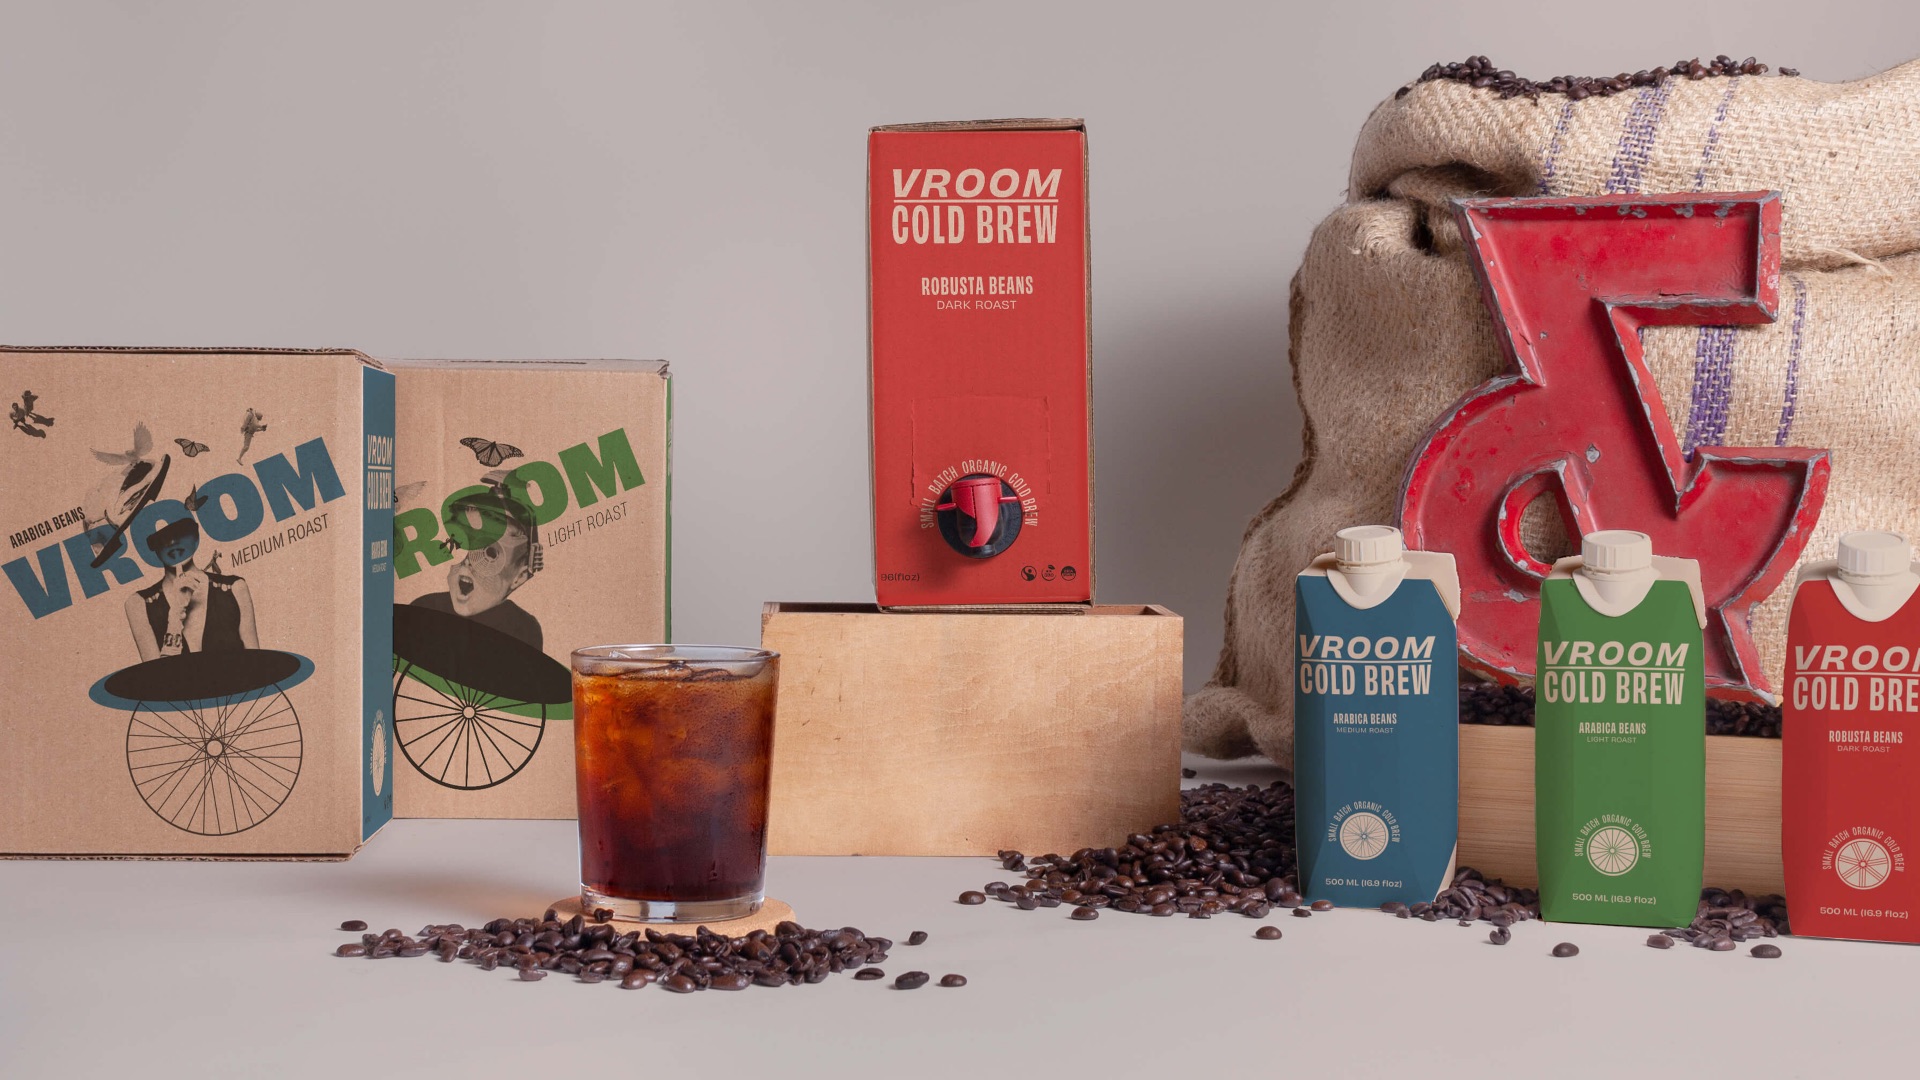 Vroom Cold Brew Student Packaging Concept